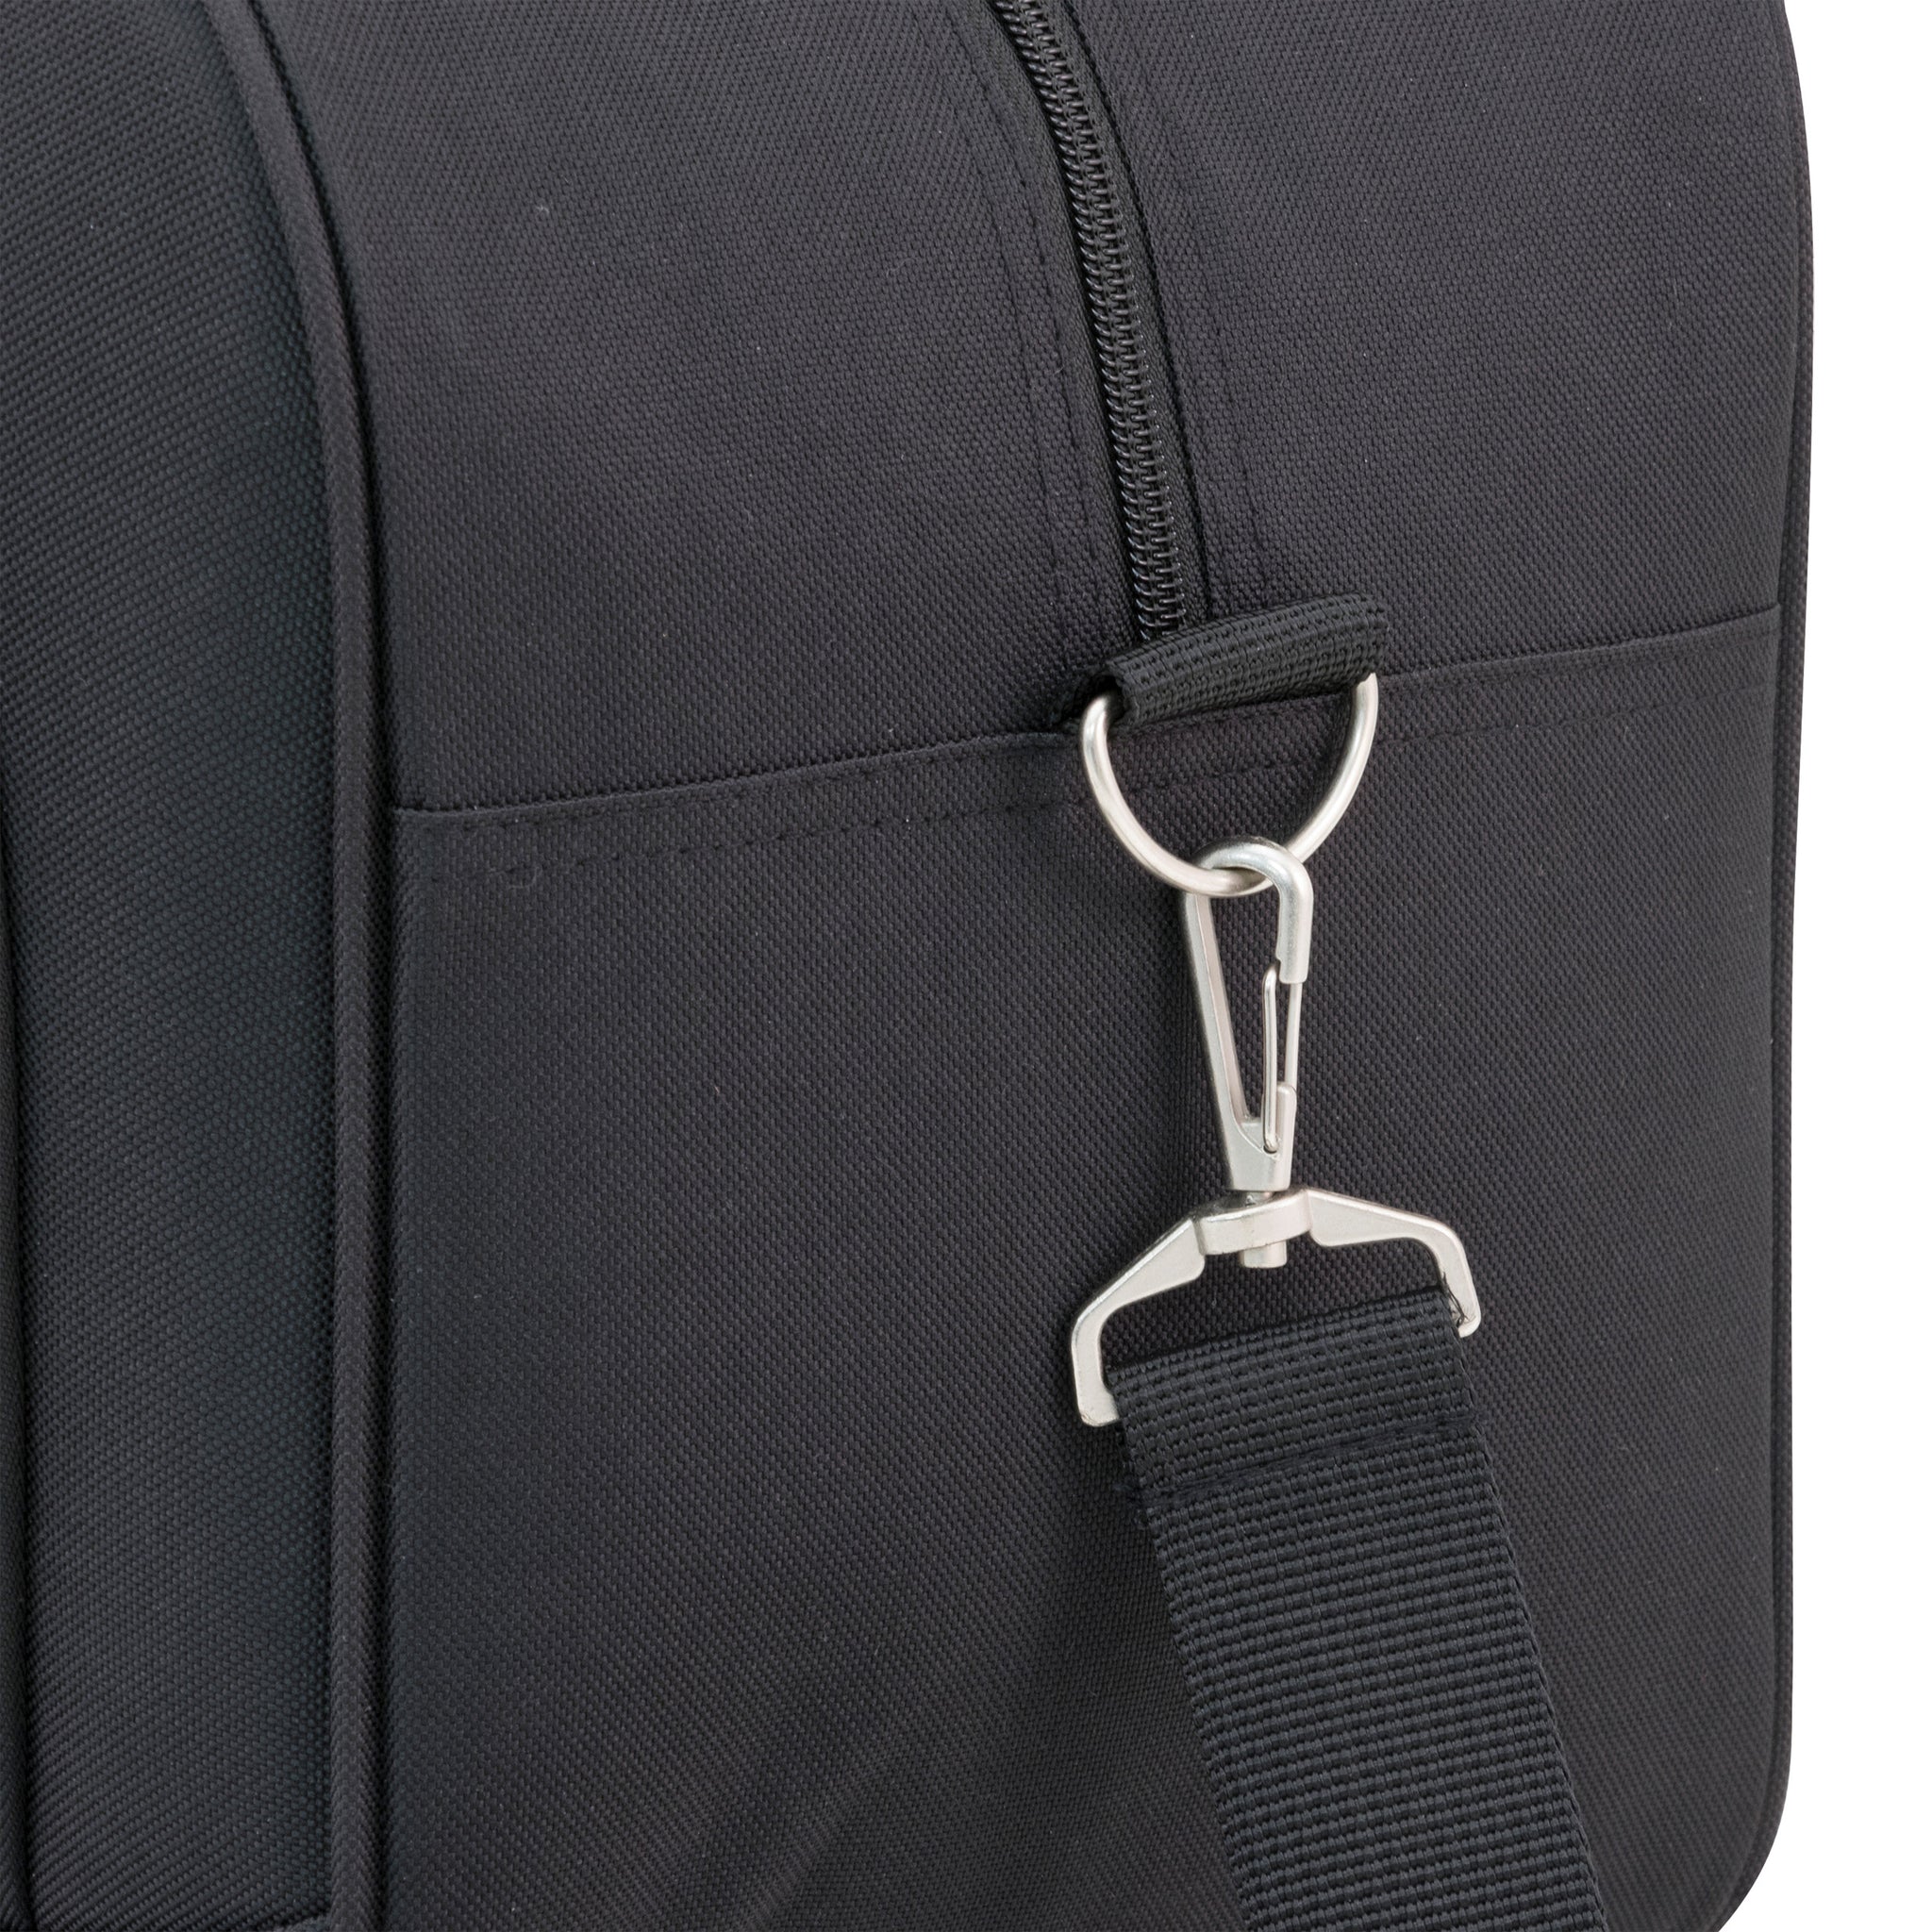 Laptop Bags & Cases - leather - 212 products